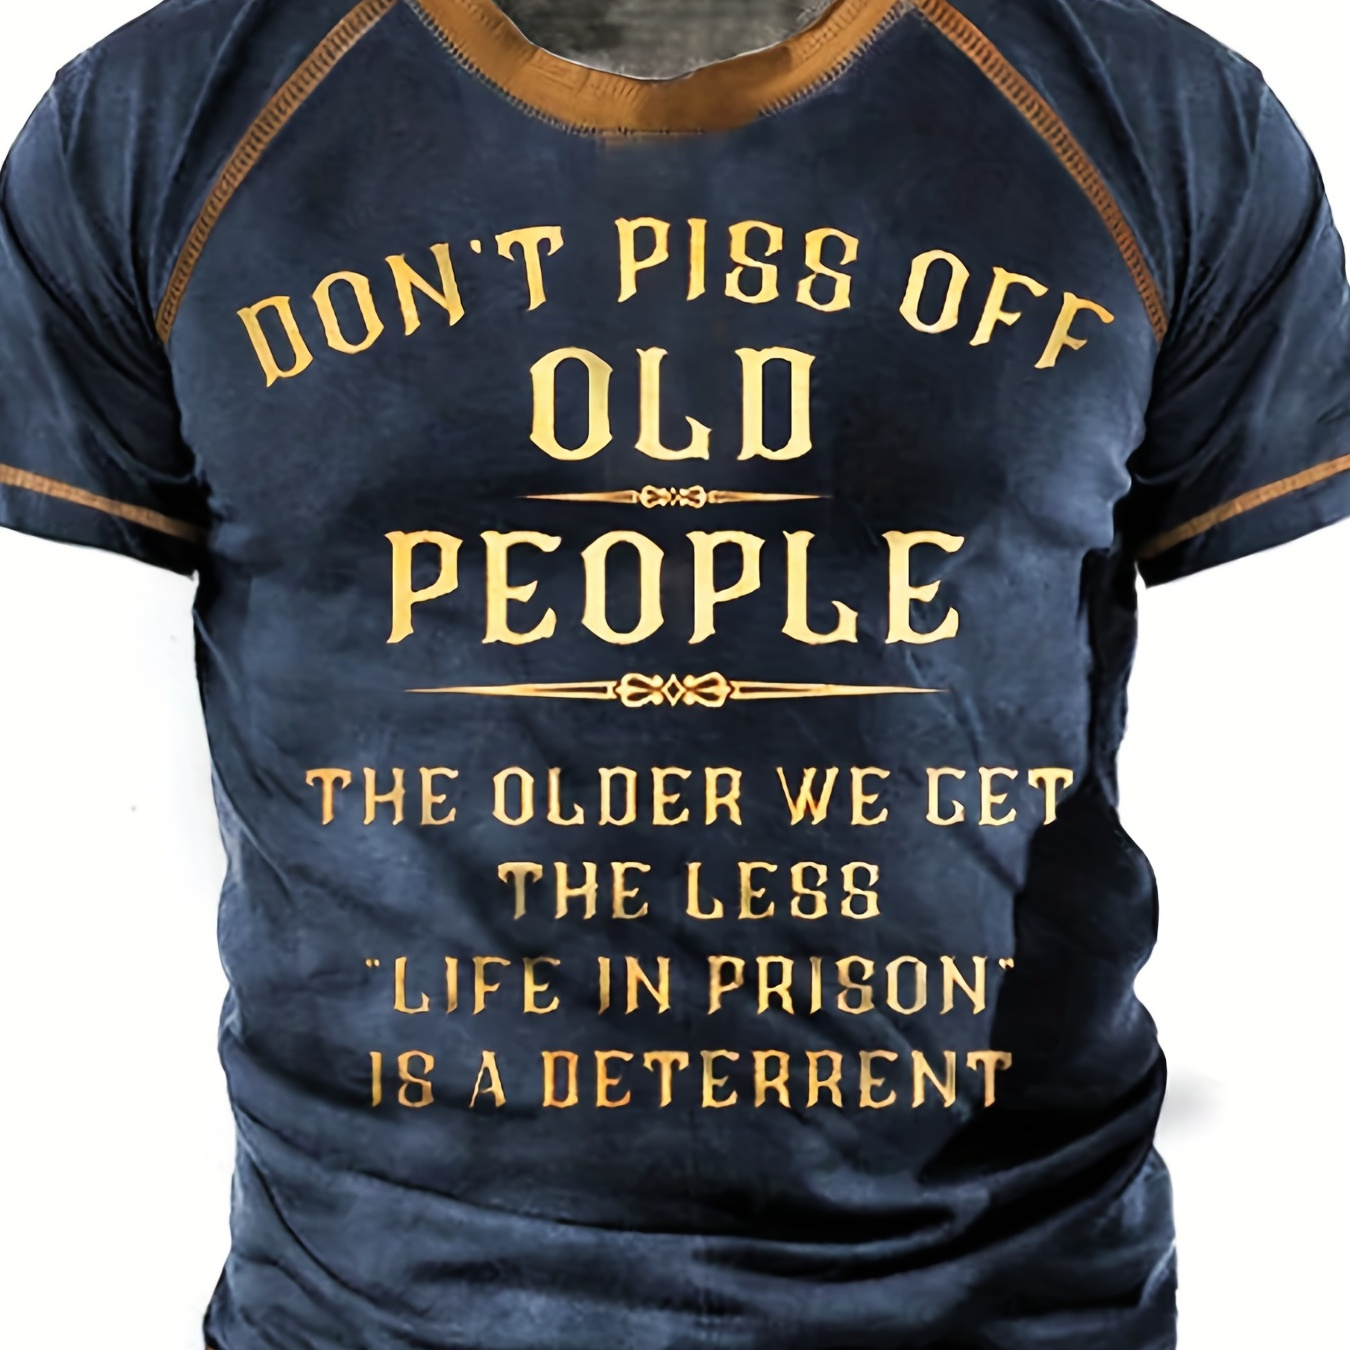 

don't Piss Off Old People" Men's Vintage Short Sleeve Crew Neck T-shirt For Summer